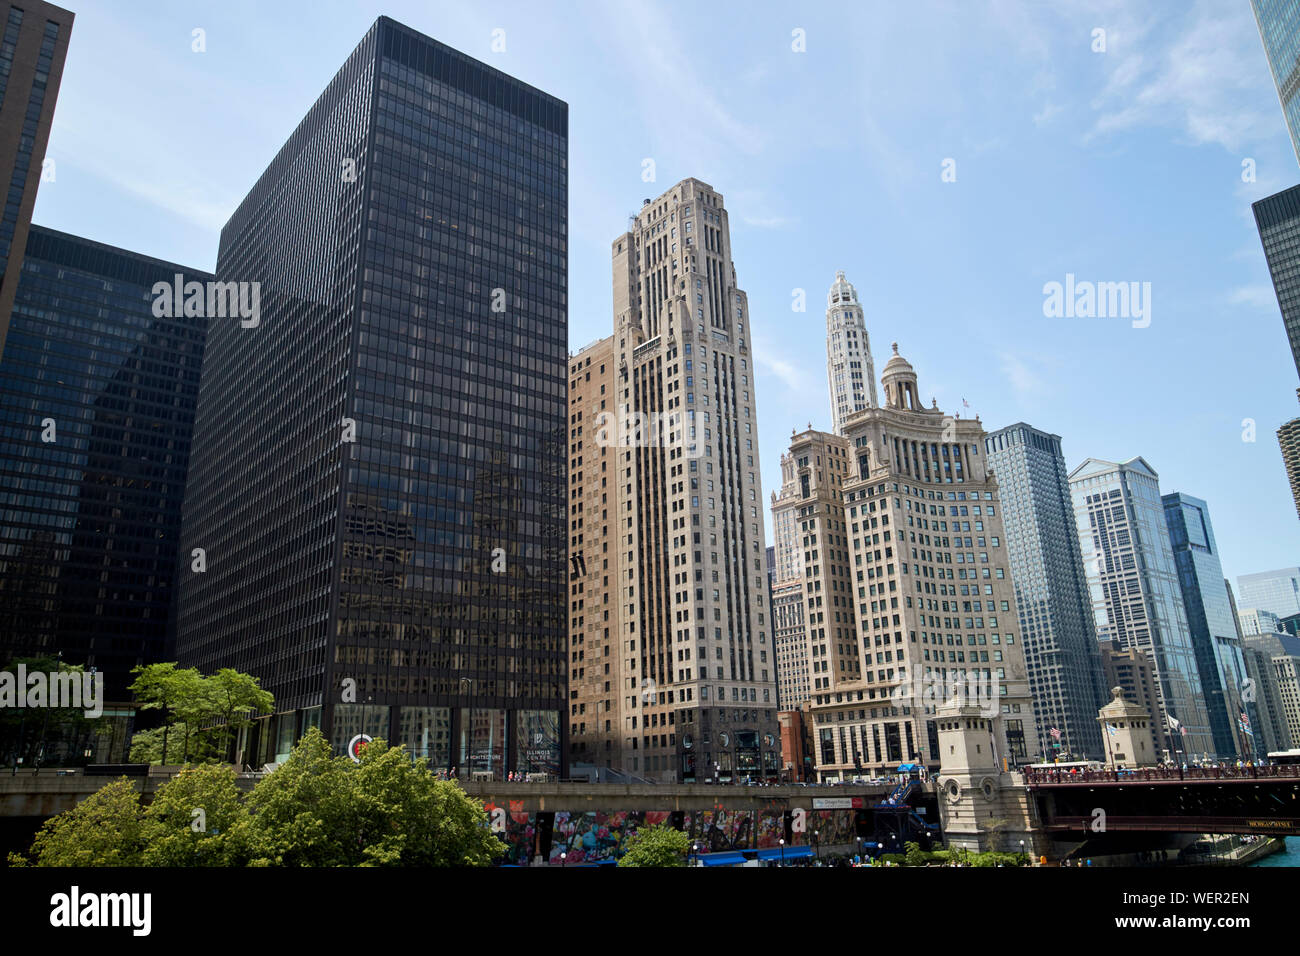 one illinois center home to the chicago architecture center and 333 north michigan tower and other buildings and dusable bridge east side chicago illi Stock Photo